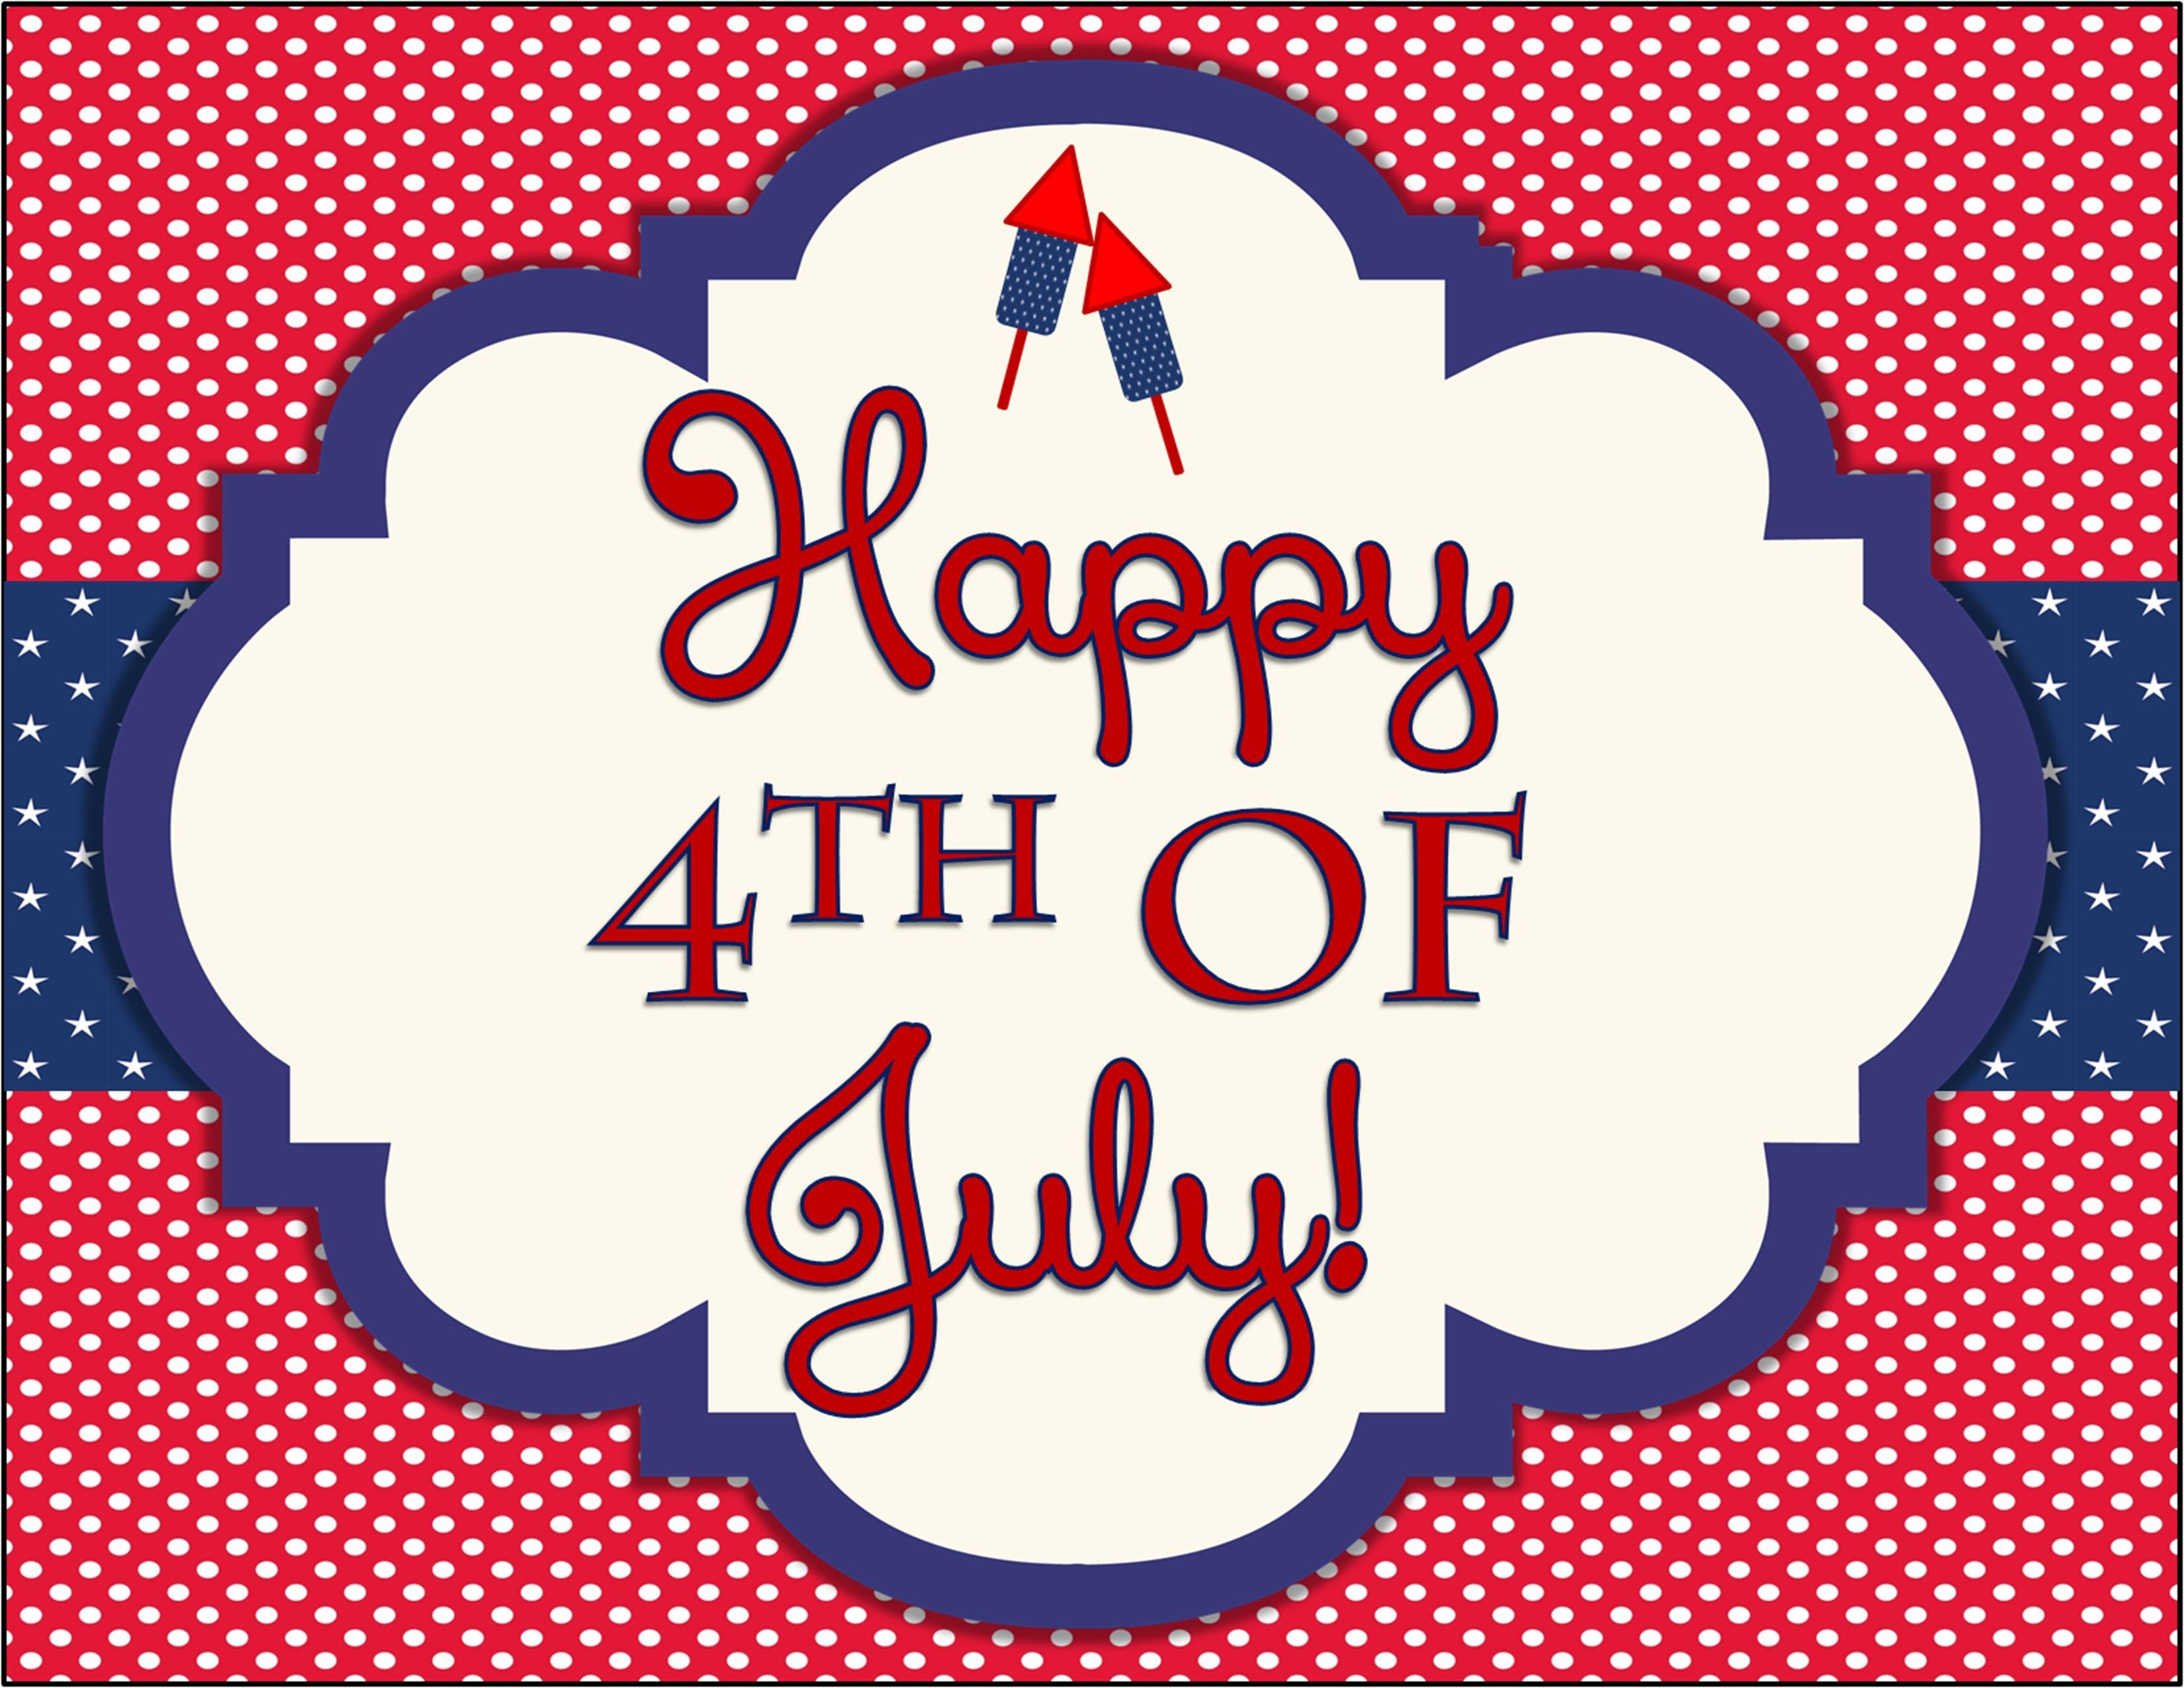 Happy 4th of July 2020 Image Archives Mothers Day 2021 Wishing Image. Happy Fathers Day 2021 Image